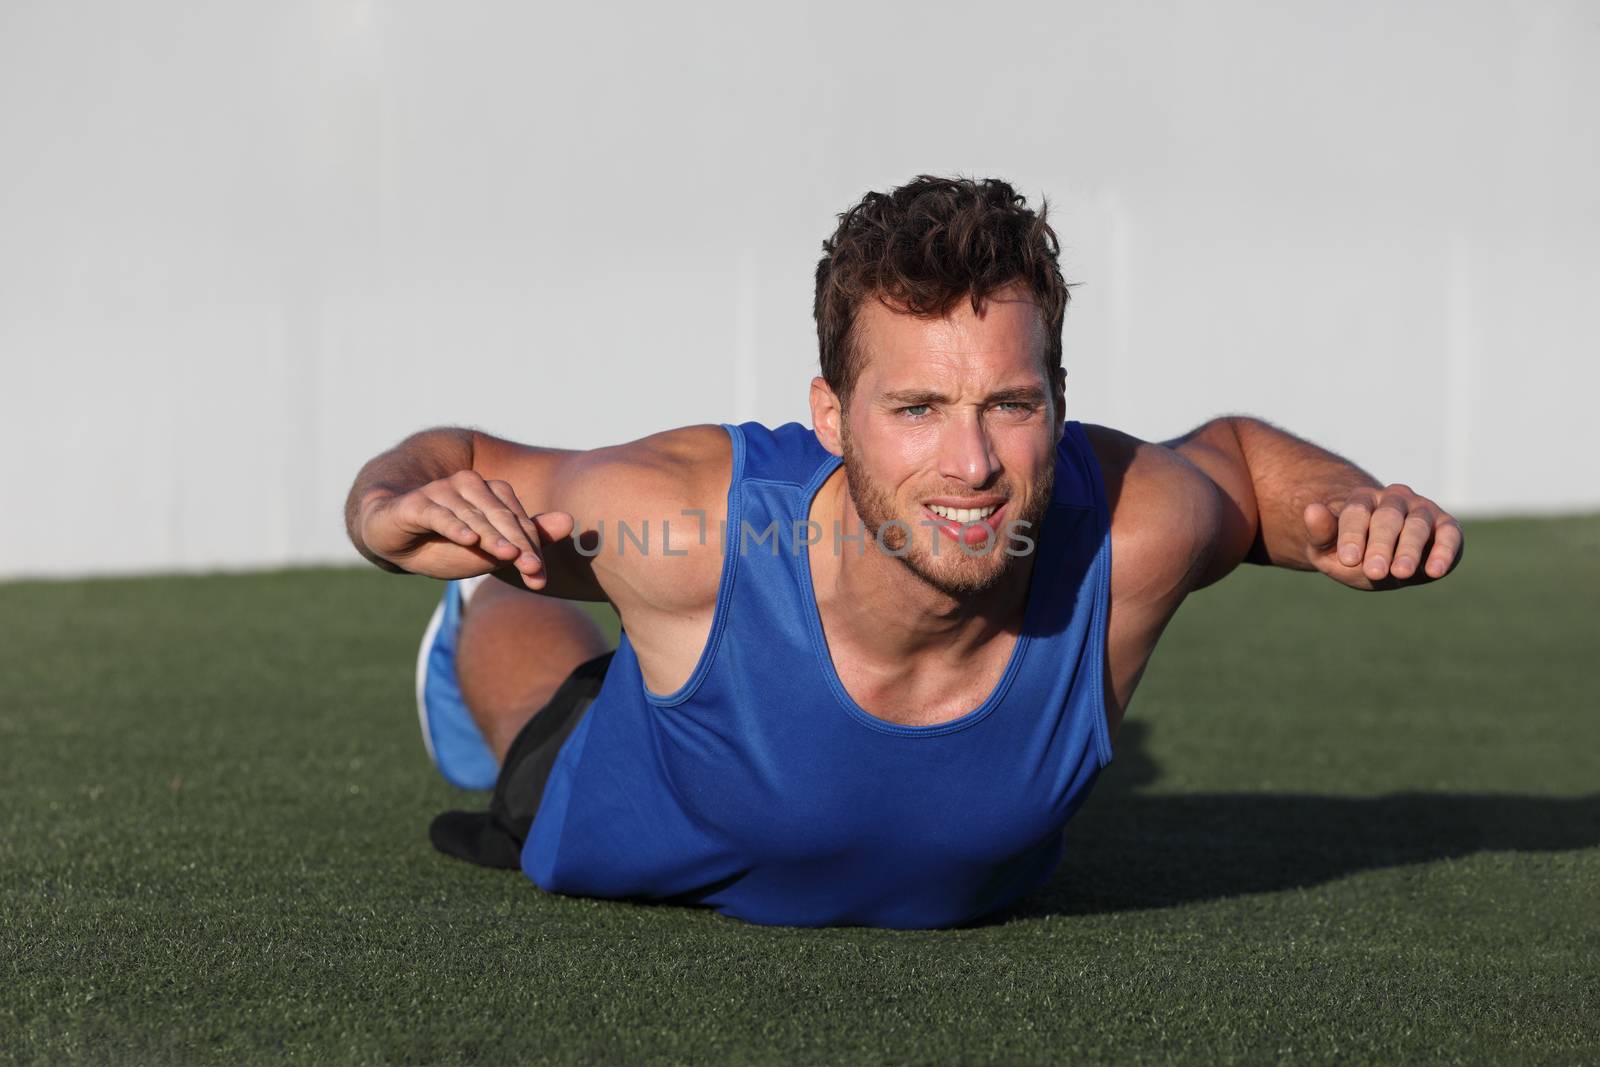 Fitness training back fat exercise fit man doing superman variation of lower body workout. Strong athlete working out outdoors in park grass. Lower body back lumbar muscles strengthening exercises.